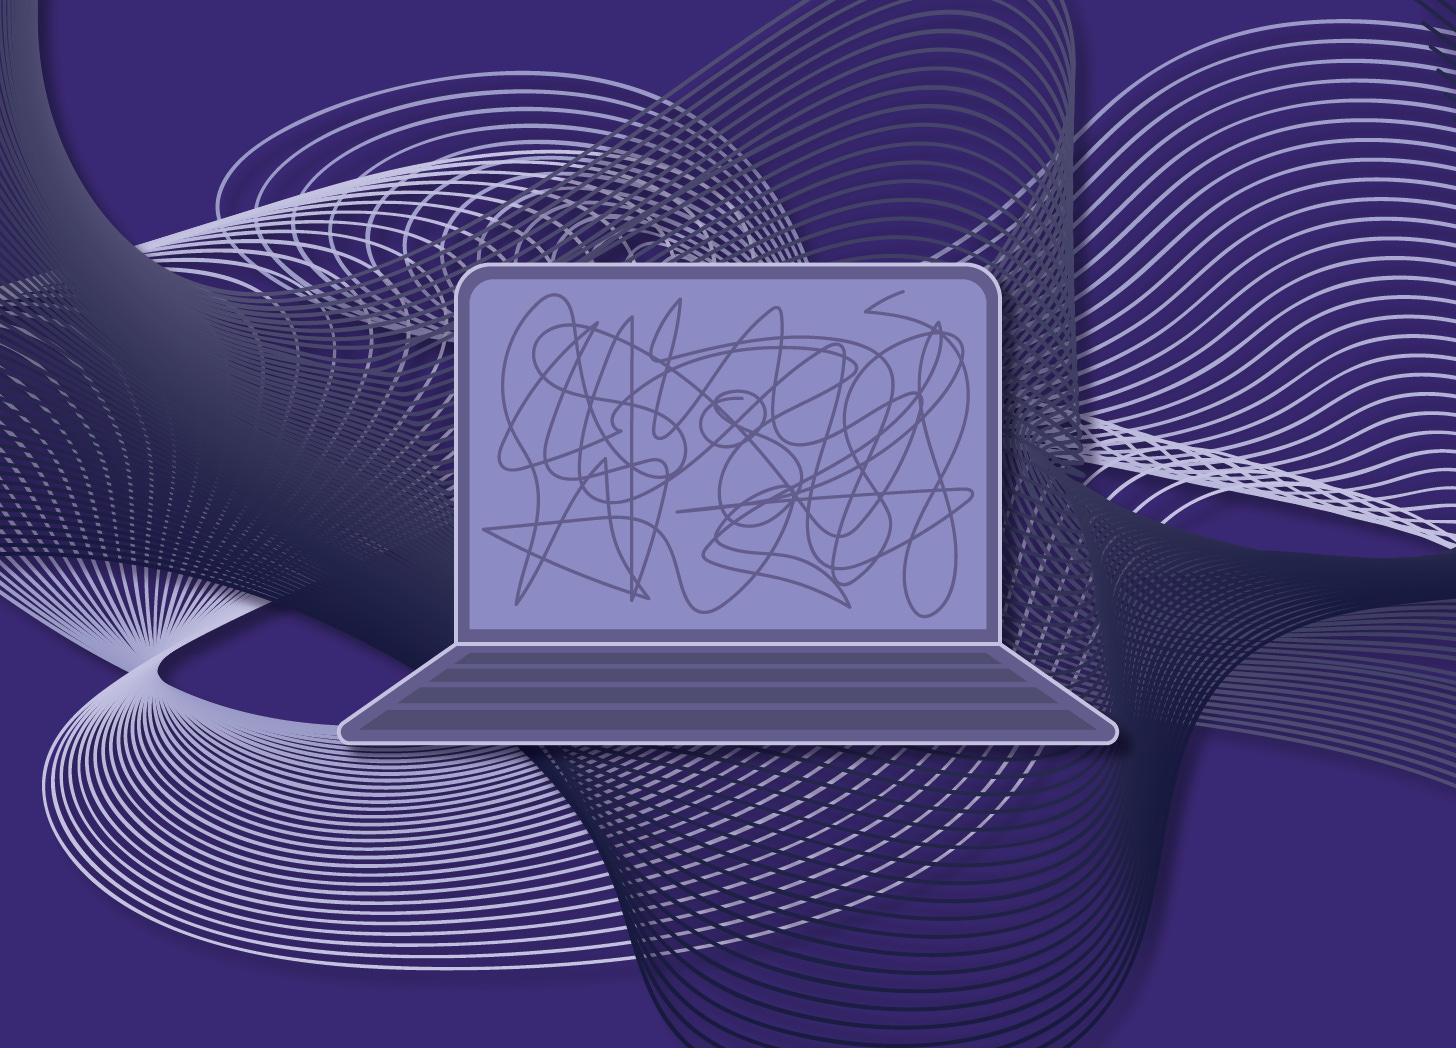 illustration of a laptop with scribbles on the screen